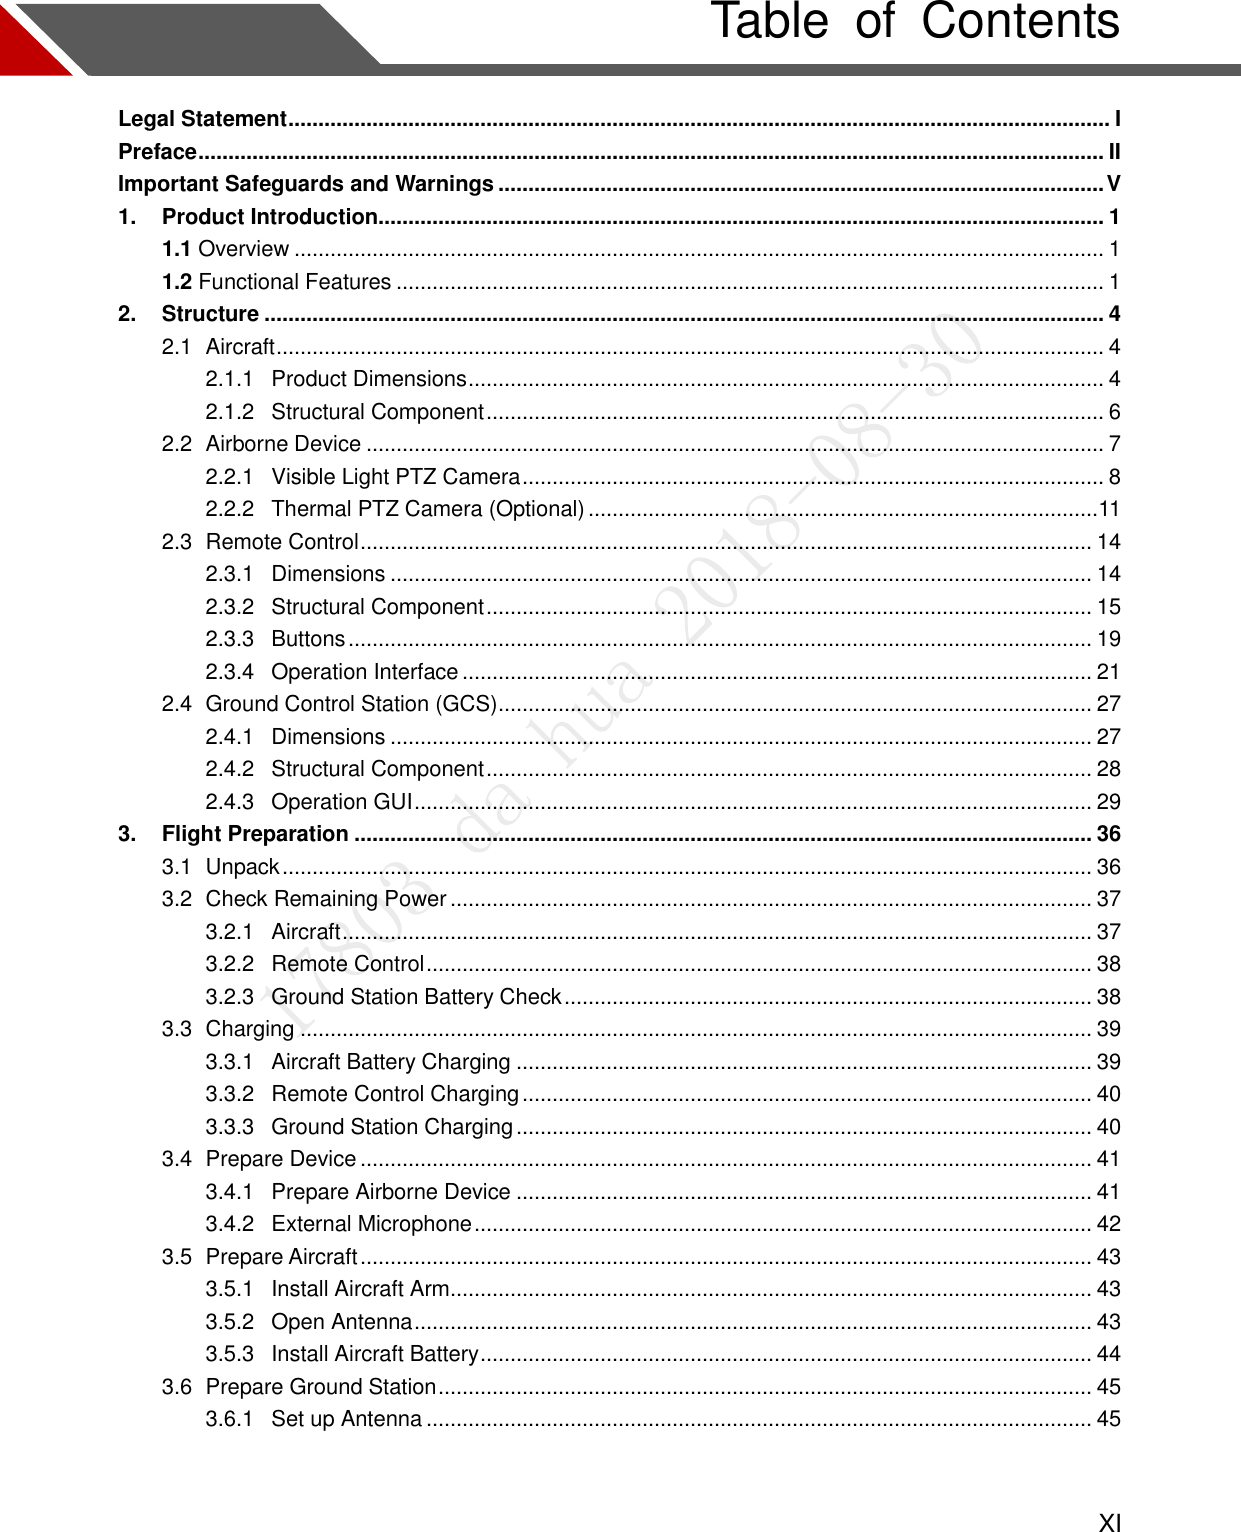    XI Table  of  Contents Legal Statement ......................................................................................................................................... I Preface ....................................................................................................................................................... II Important Safeguards and Warnings ..................................................................................................... V 1. Product Introduction......................................................................................................................... 1 1.1 Overview ....................................................................................................................................... 1 1.2 Functional Features ...................................................................................................................... 1 2. Structure ............................................................................................................................................ 4 2.1  Aircraft .......................................................................................................................................... 4 2.1.1  Product Dimensions .......................................................................................................... 4 2.1.2  Structural Component ....................................................................................................... 6 2.2  Airborne Device ........................................................................................................................... 7 2.2.1  Visible Light PTZ Camera ................................................................................................. 8 2.2.2  Thermal PTZ Camera (Optional) ..................................................................................... 11 2.3  Remote Control .......................................................................................................................... 14 2.3.1  Dimensions ..................................................................................................................... 14 2.3.2  Structural Component ..................................................................................................... 15 2.3.3  Buttons ............................................................................................................................ 19 2.3.4  Operation Interface ......................................................................................................... 21 2.4  Ground Control Station (GCS) ................................................................................................... 27 2.4.1  Dimensions ..................................................................................................................... 27 2.4.2  Structural Component ..................................................................................................... 28 2.4.3  Operation GUI ................................................................................................................. 29 3. Flight Preparation ........................................................................................................................... 36 3.1  Unpack ....................................................................................................................................... 36 3.2  Check Remaining Power ........................................................................................................... 37 3.2.1  Aircraft ............................................................................................................................. 37 3.2.2  Remote Control ............................................................................................................... 38 3.2.3  Ground Station Battery Check ........................................................................................ 38 3.3  Charging .................................................................................................................................... 39 3.3.1  Aircraft Battery Charging ................................................................................................ 39 3.3.2  Remote Control Charging ............................................................................................... 40 3.3.3  Ground Station Charging ................................................................................................ 40 3.4  Prepare Device .......................................................................................................................... 41 3.4.1  Prepare Airborne Device ................................................................................................ 41 3.4.2  External Microphone ....................................................................................................... 42 3.5  Prepare Aircraft .......................................................................................................................... 43 3.5.1  Install Aircraft Arm........................................................................................................... 43 3.5.2  Open Antenna ................................................................................................................. 43 3.5.3  Install Aircraft Battery ...................................................................................................... 44 3.6  Prepare Ground Station ............................................................................................................. 45 3.6.1  Set up Antenna ............................................................................................................... 45  